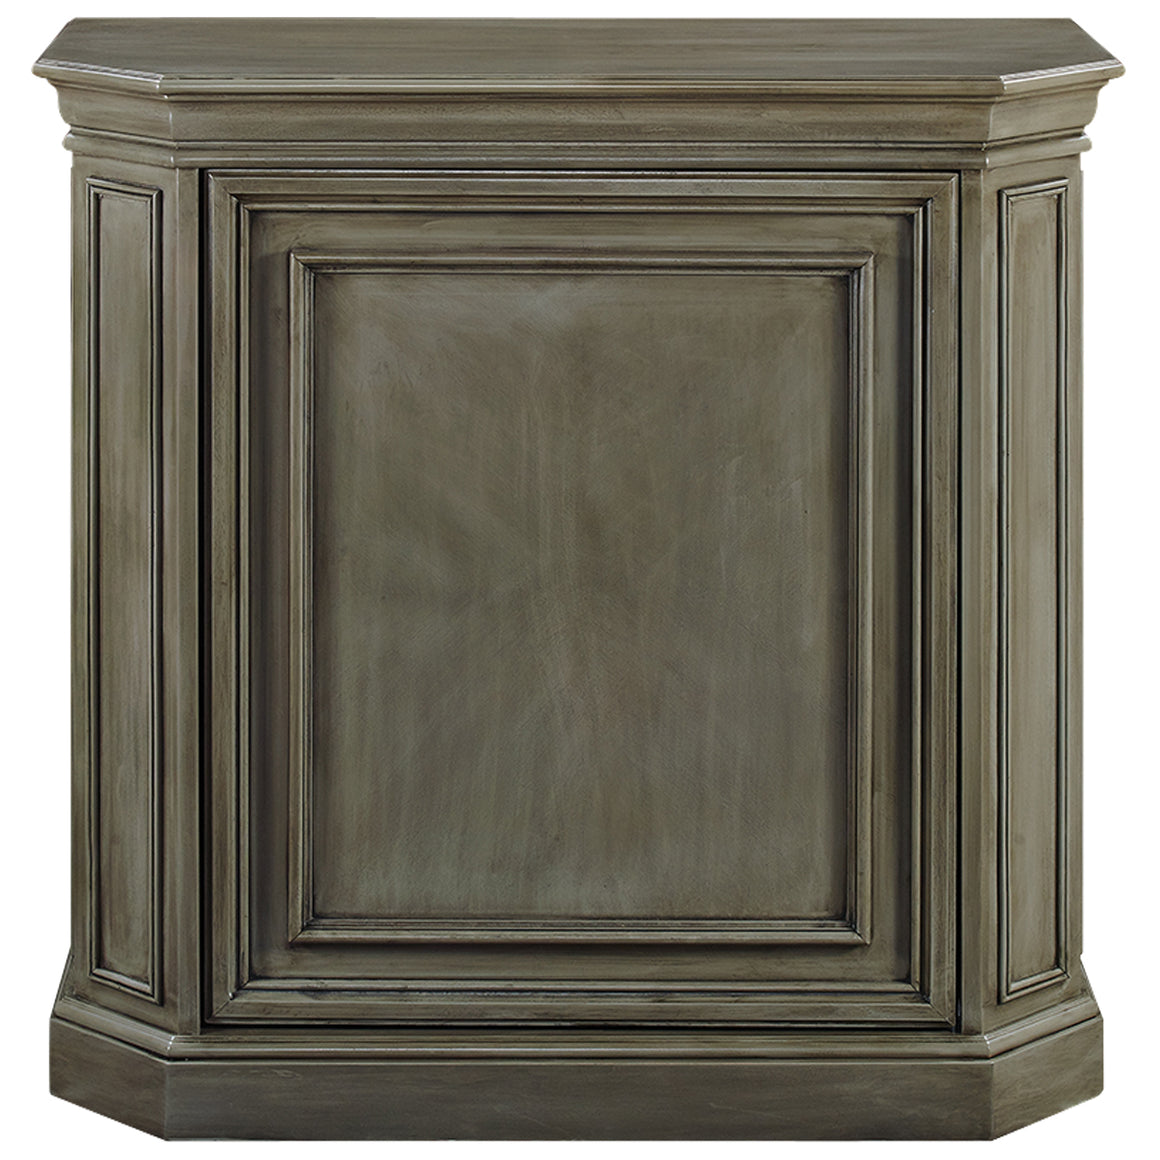 Dry Bar 60" - Slate Finish - Man Cave Boutique